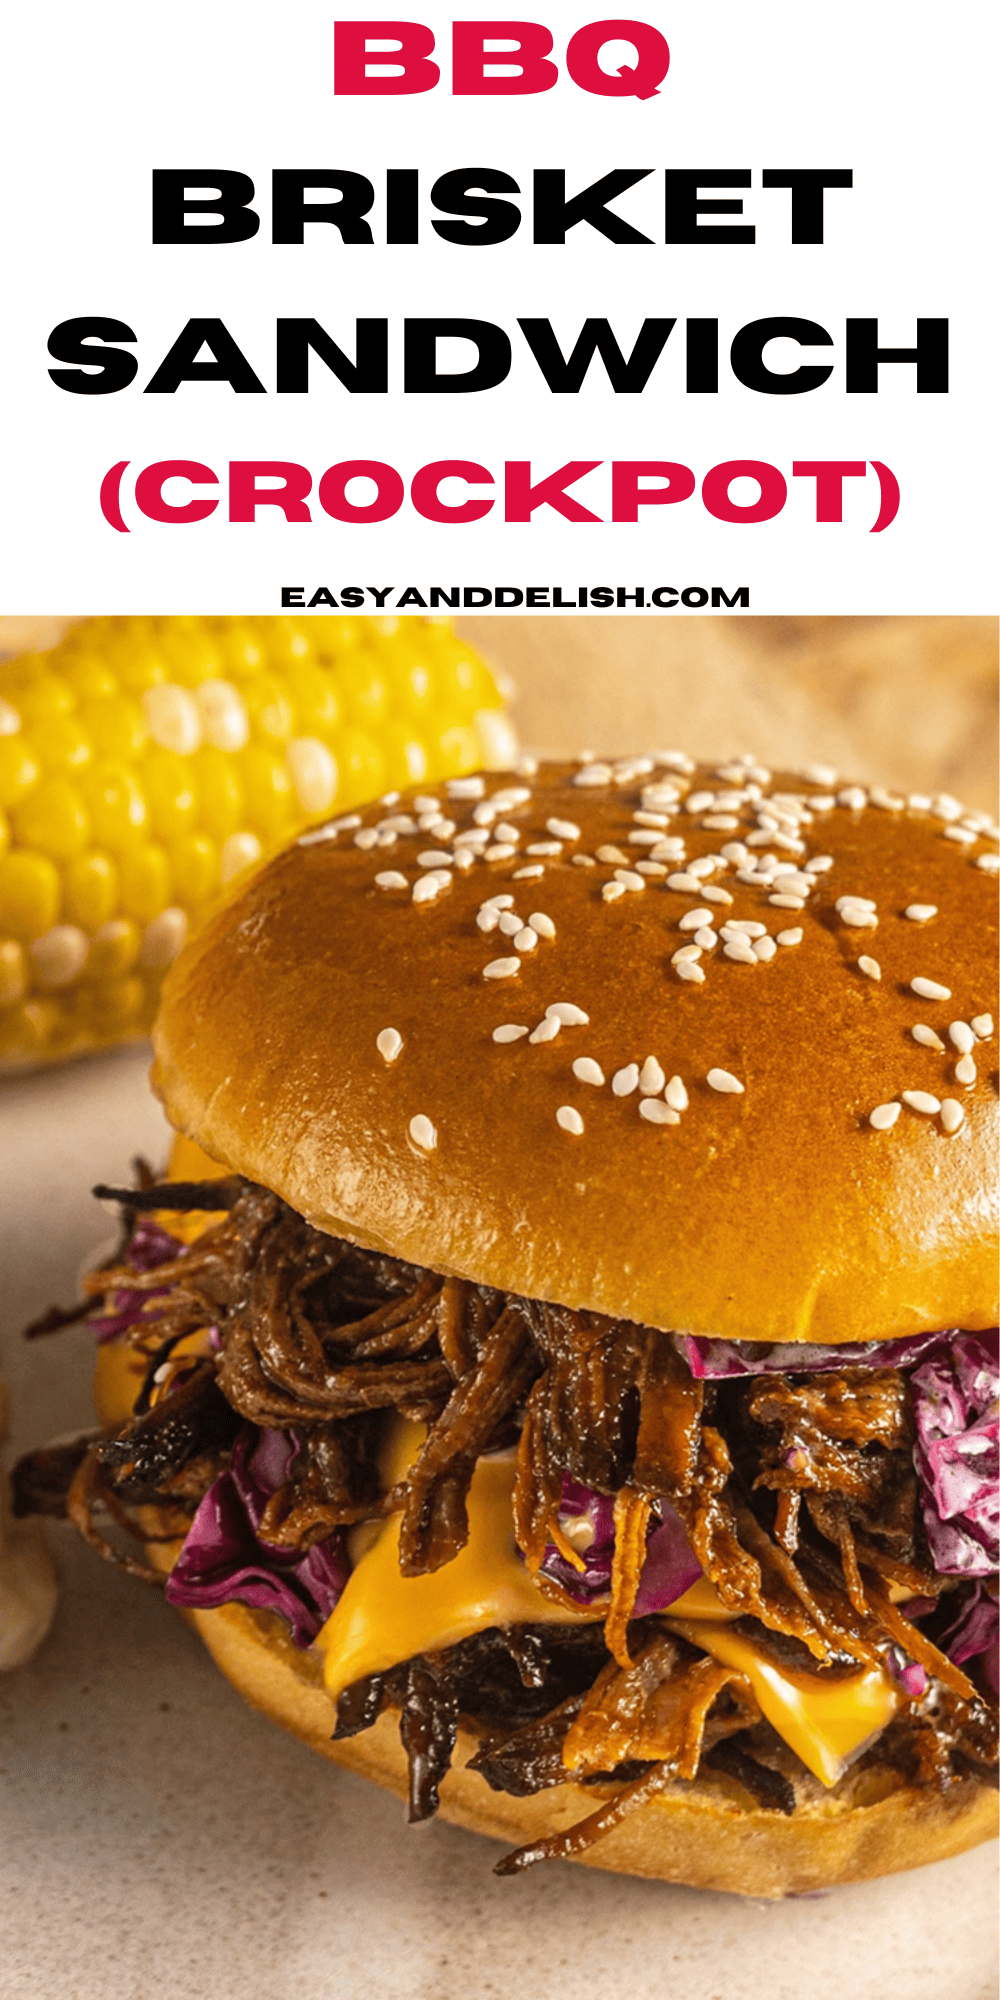 crockpot bbq brisket sandwich on a plate with a corn on the cob behind it.